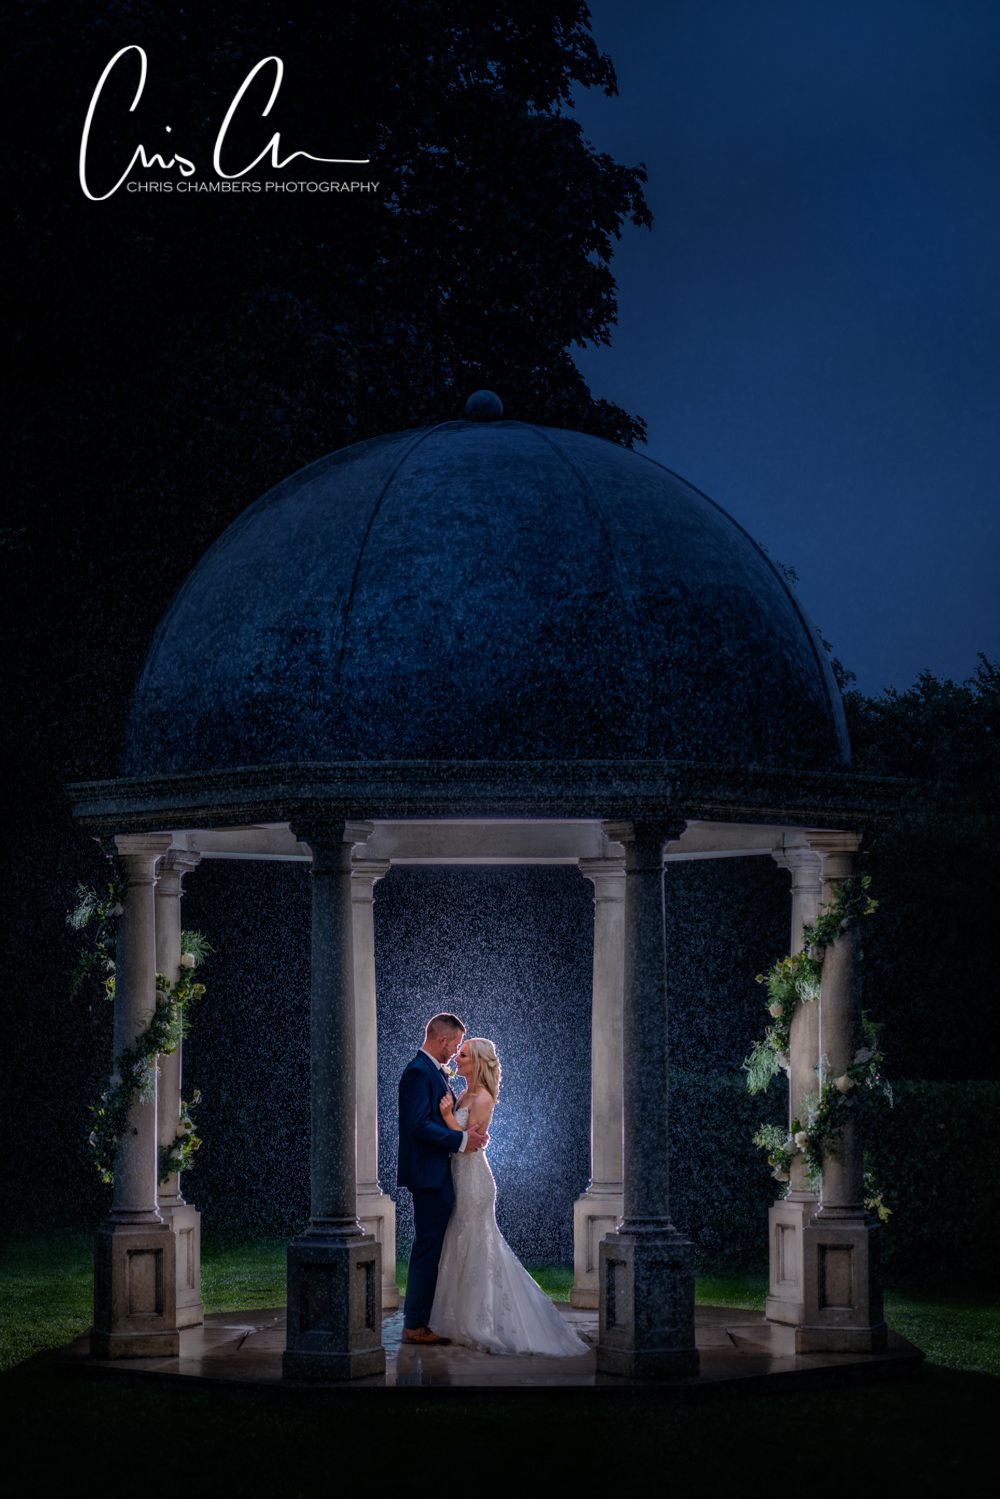 Wentbridge House Yorkshire wedding venue. Bride and groom photographed by Chris Chambers. Award winning west Yorkshire photographer